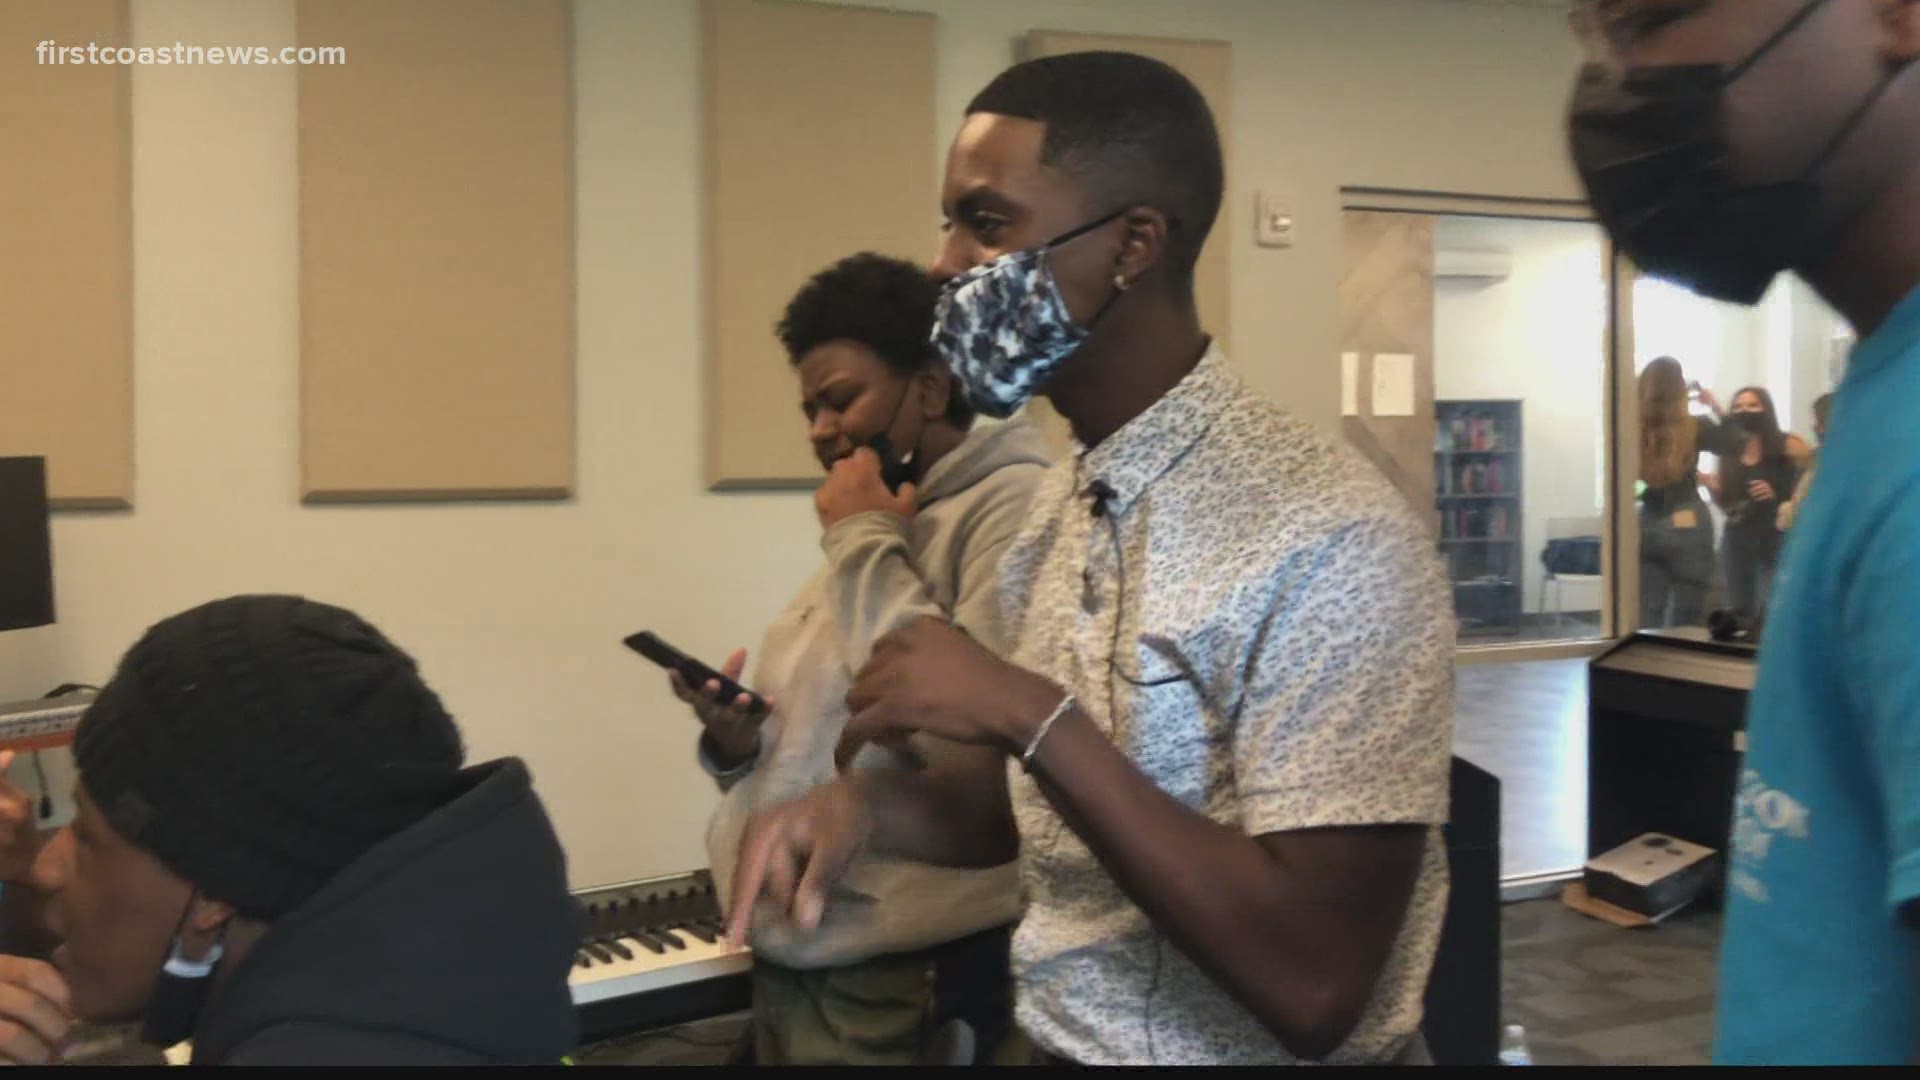 It's a first for MaliVai Washington Youth Foundation. The rapper known as SNDBOY is teaching a teen summer camp class on lyrical expression.